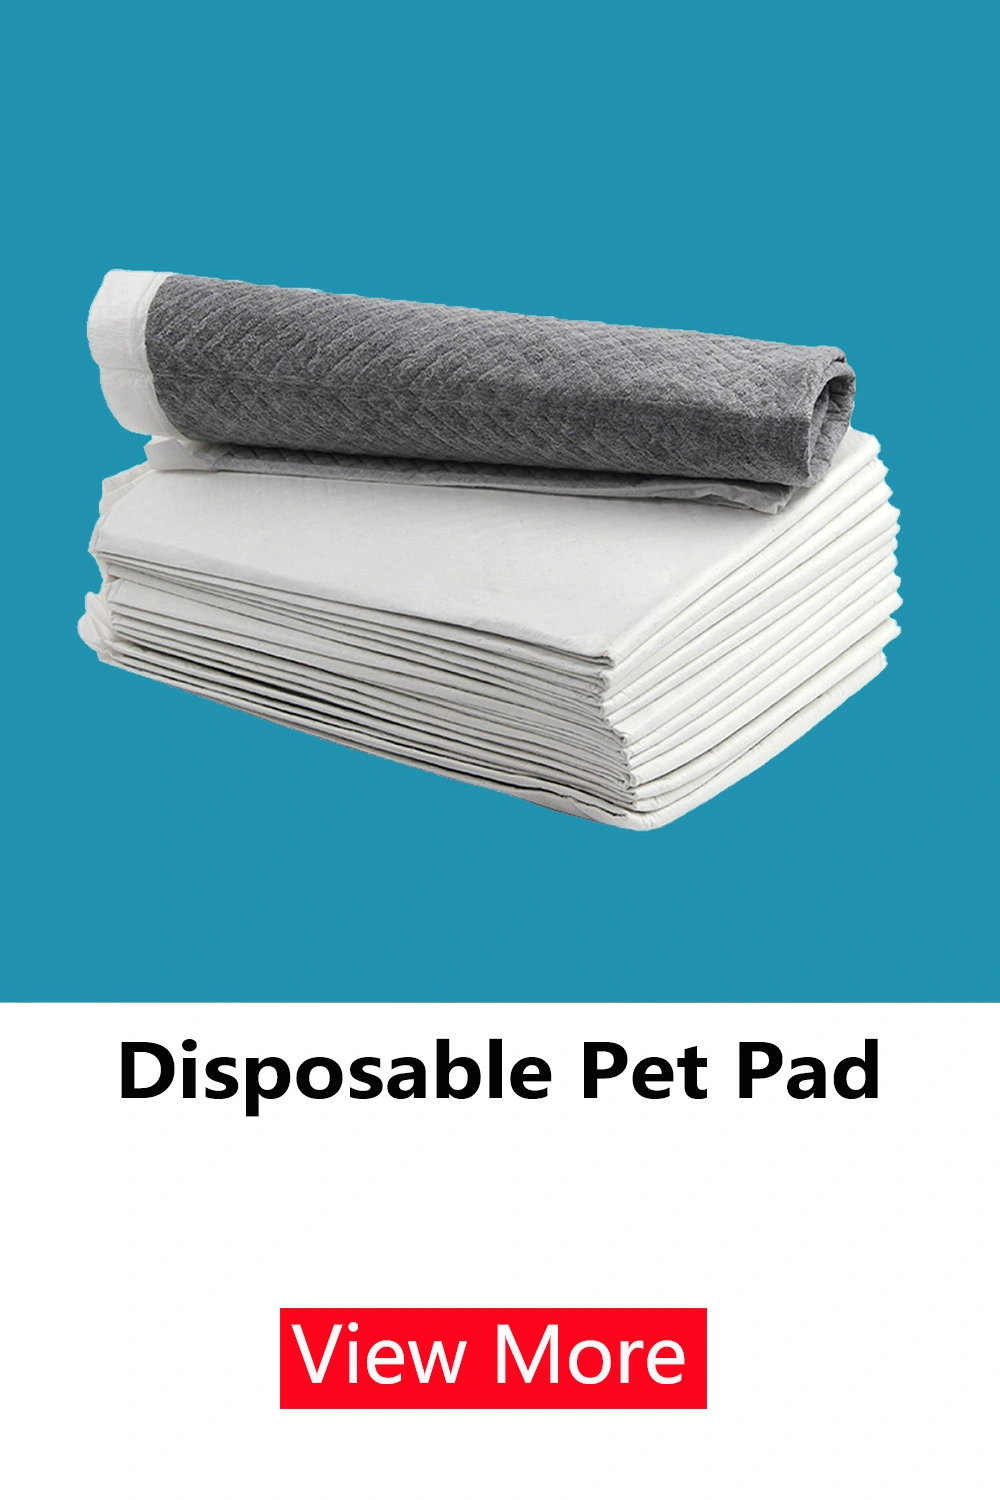 disposable dog diaper and diaposable pet pad picture